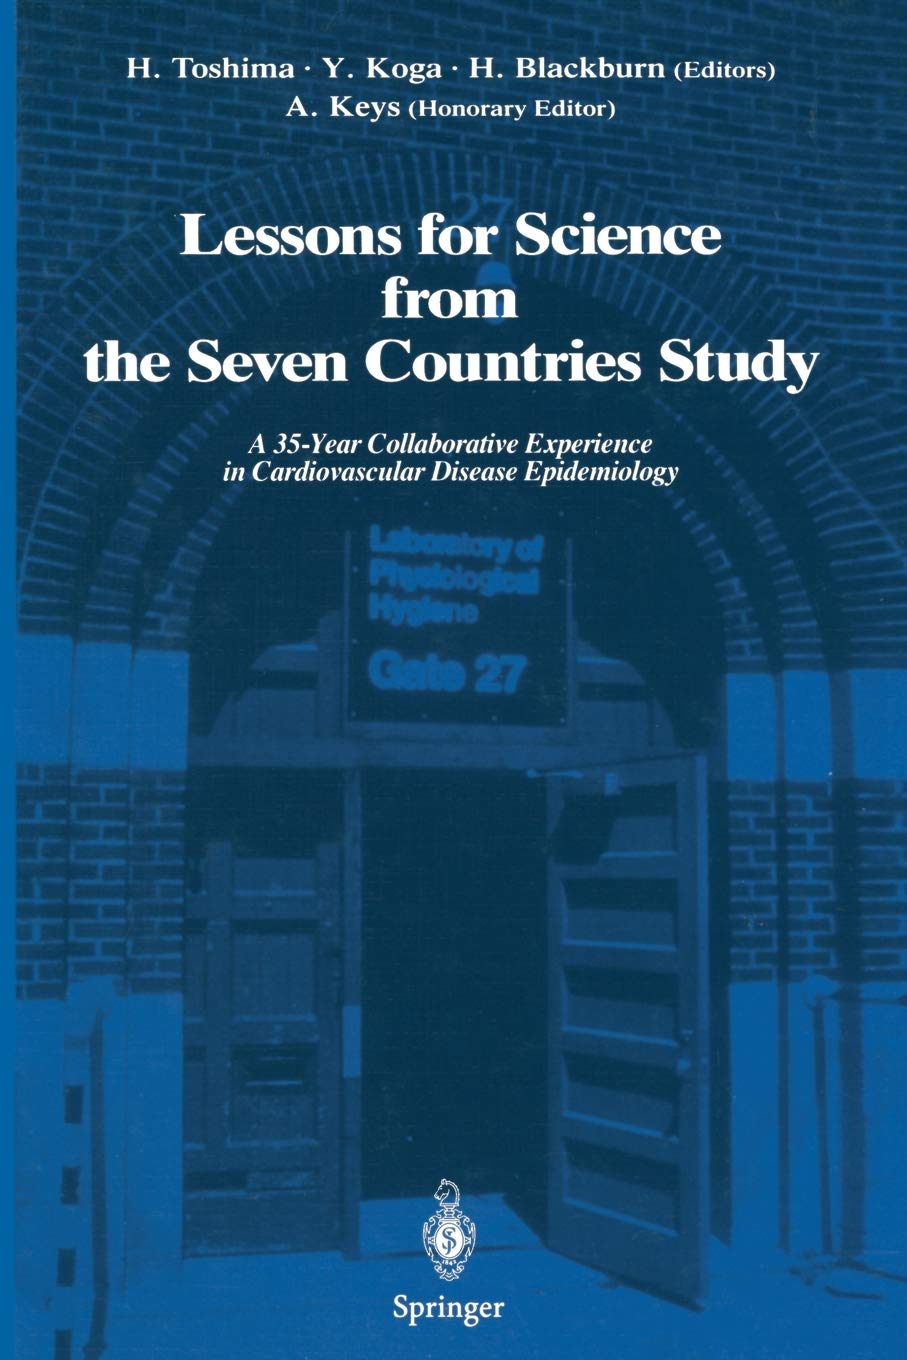 Lessons for Science from the Seven Countries Study: A 35-Year Collaborative Experience in Cardiovascular Disease Epidemiology